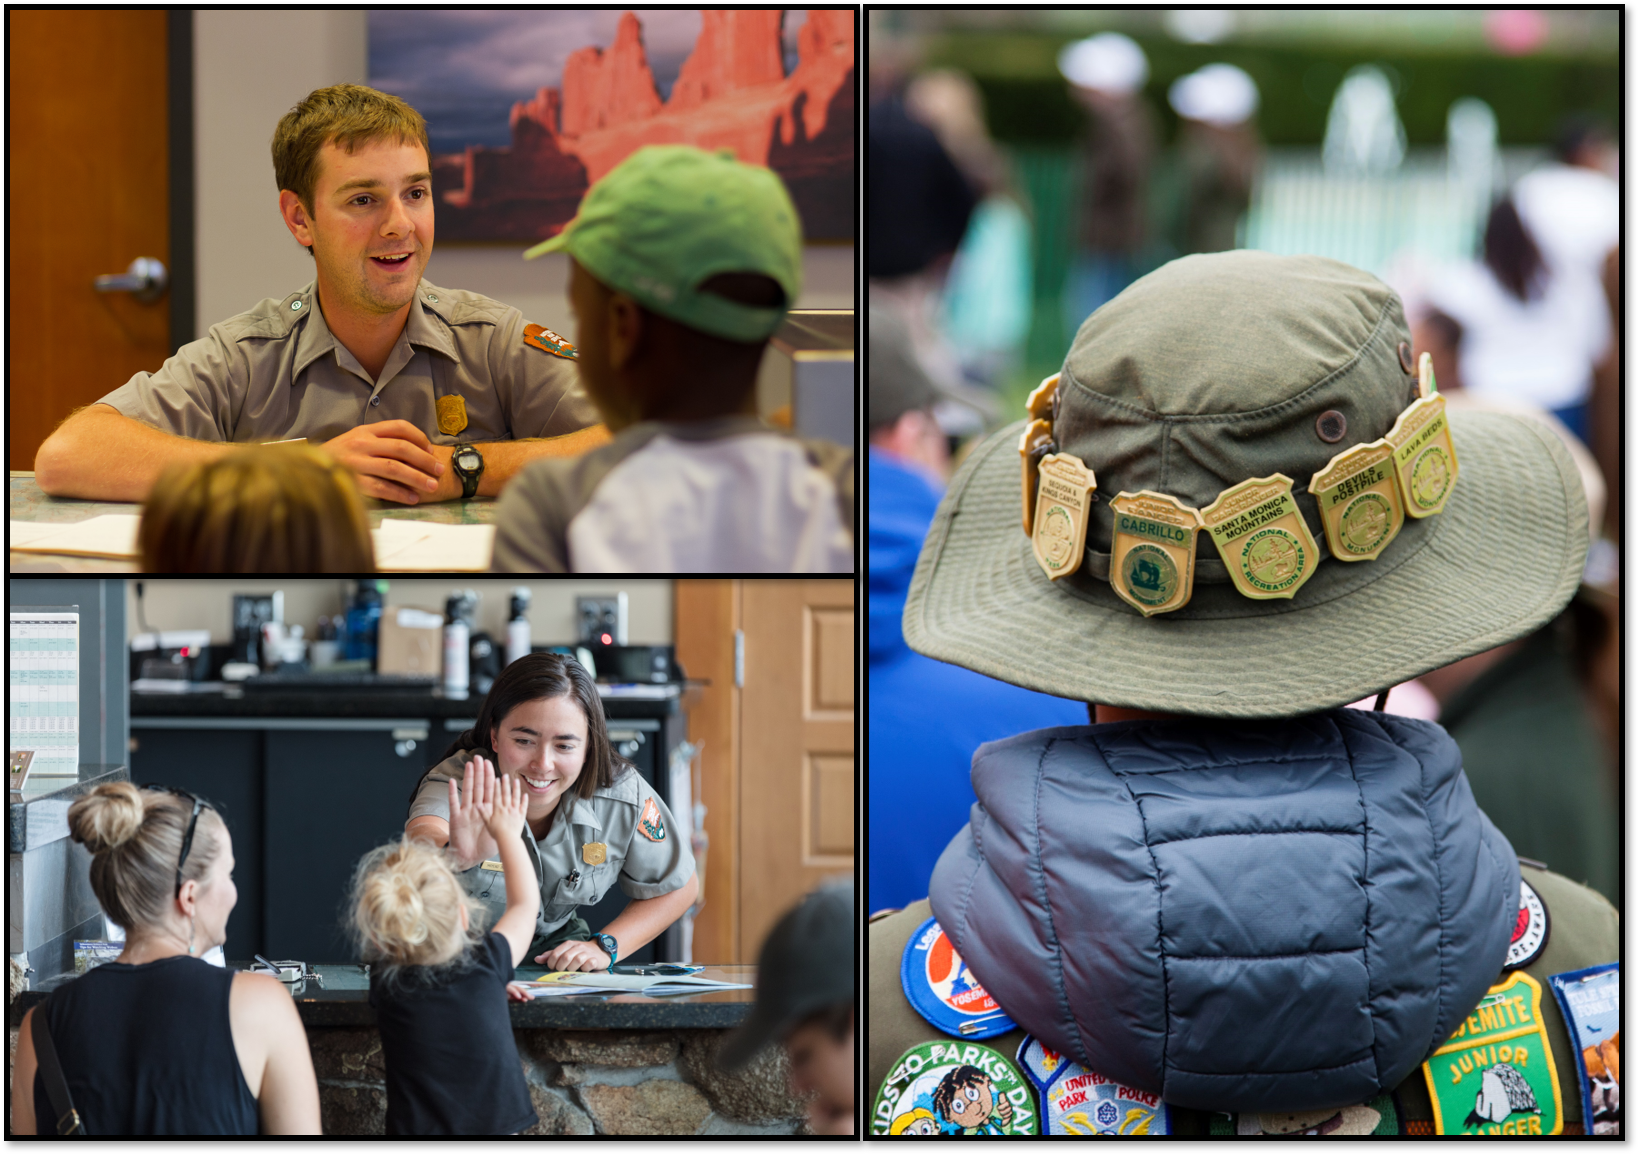 Gallery of images showing junior rangers being sworn in. On the right is a person wearing a soft brimmed hat lined with junior ranger pins